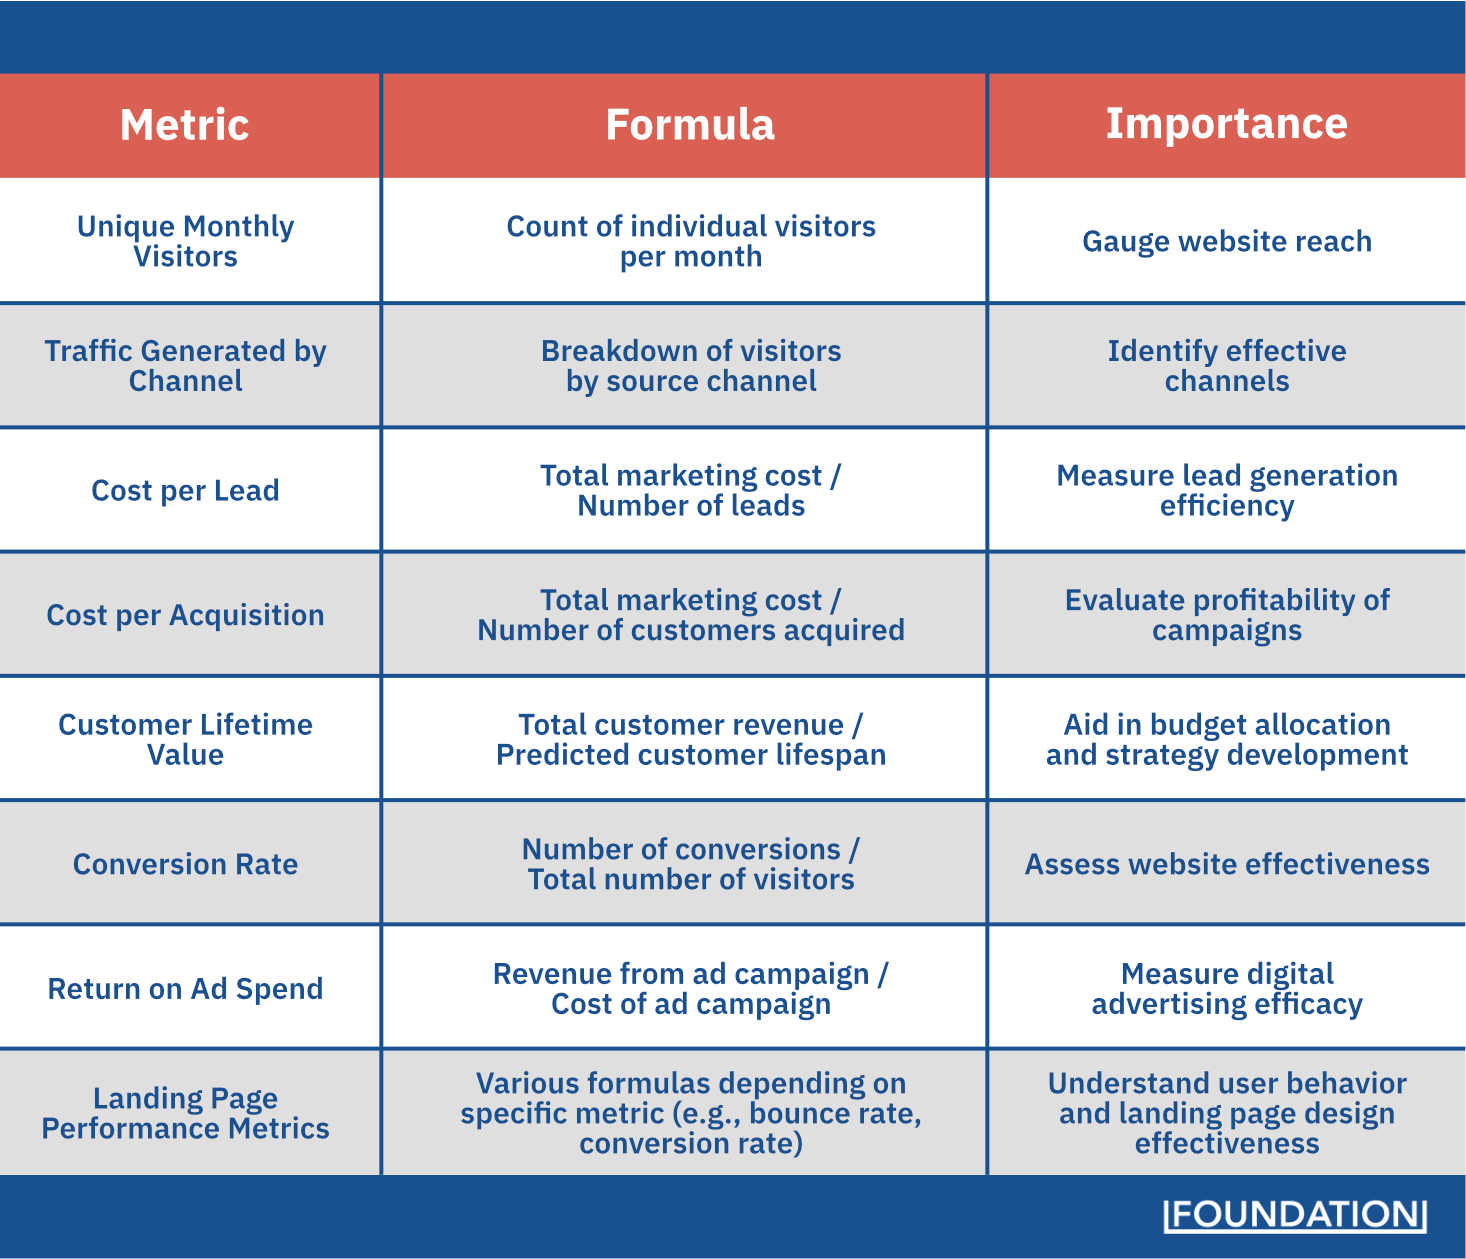 Table of marketing metrics and their formulas, highlighting their importance in analyzing website performance, lead generation, campaign profitability, and landing page effectiveness.